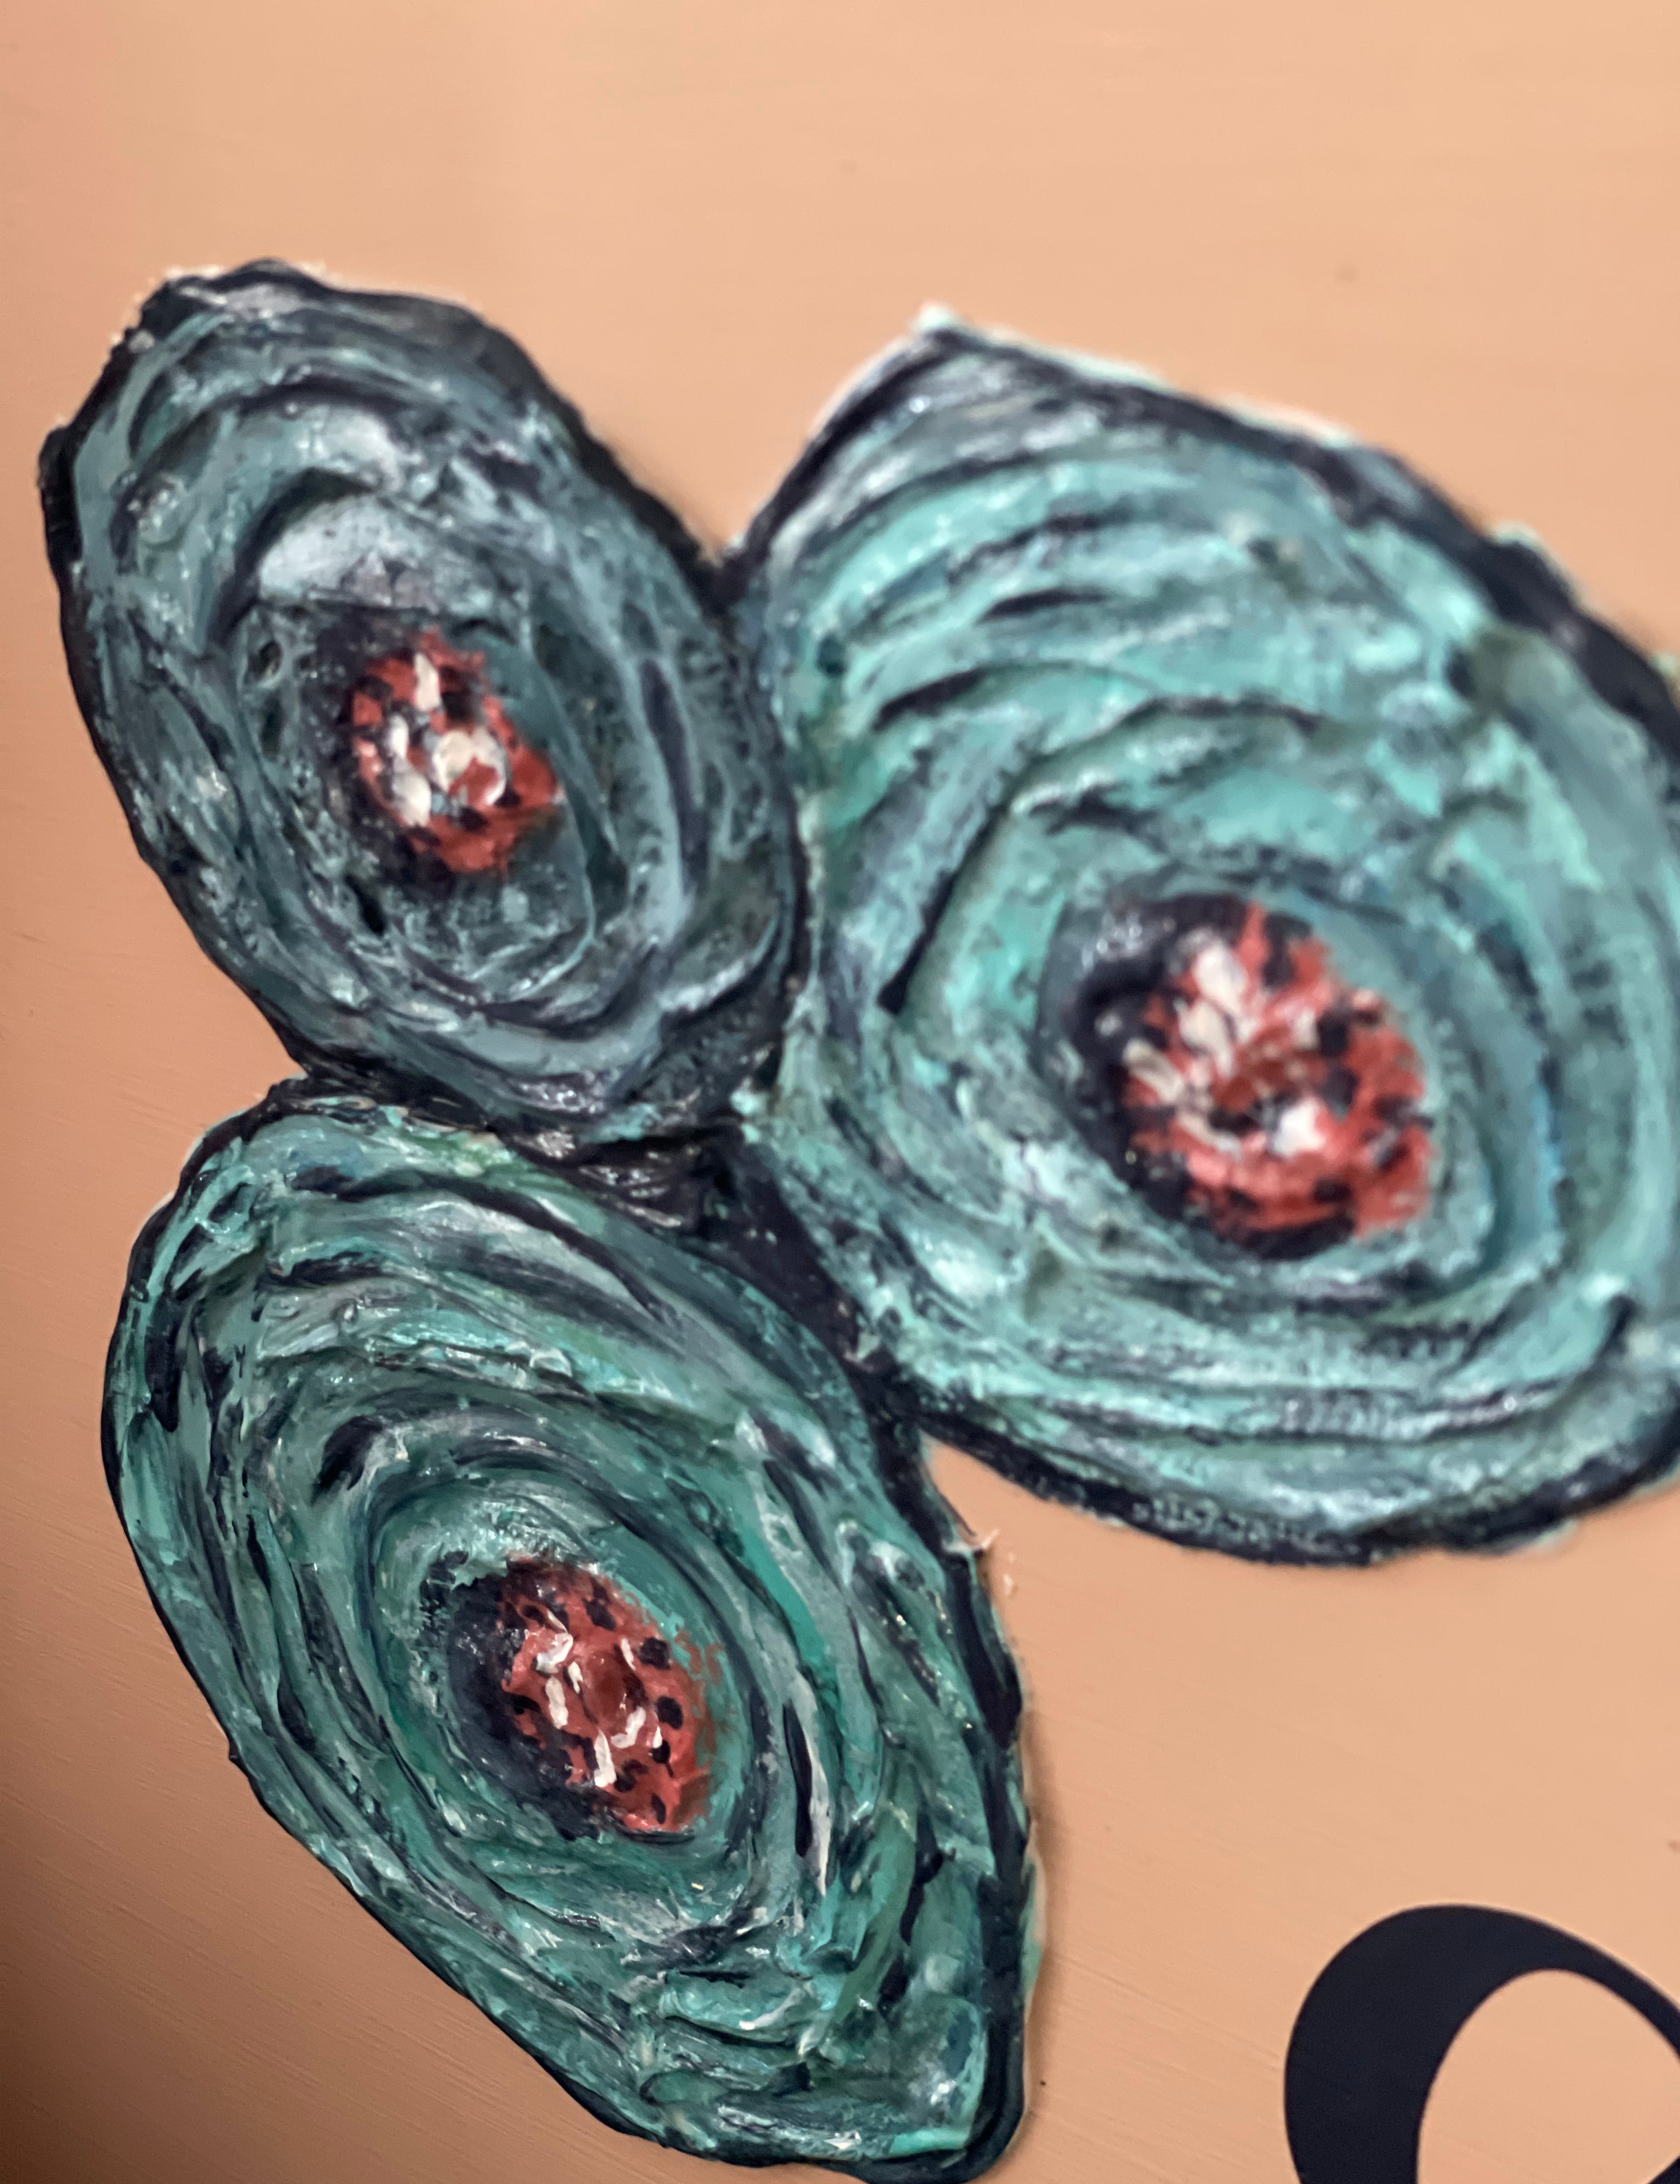 This image shows a close up of the textured floral roses.